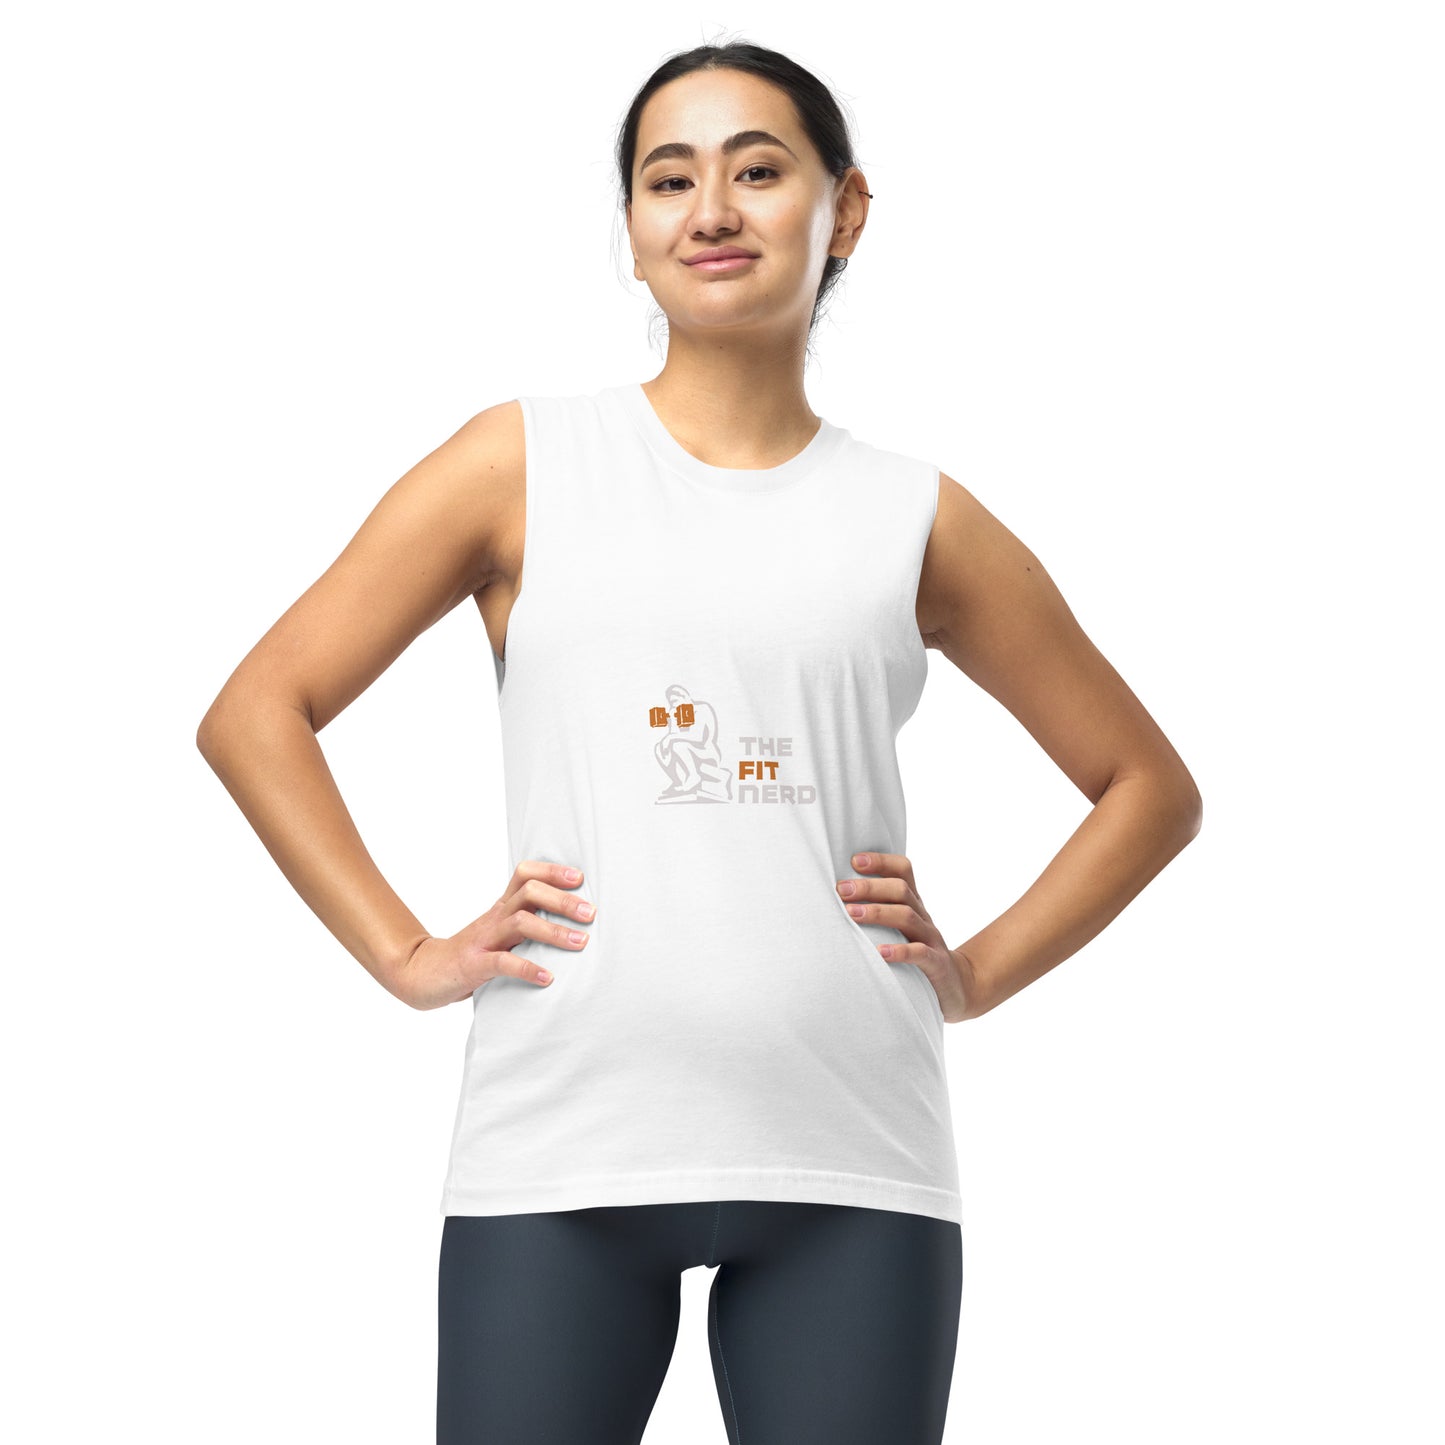 The Fit Nerd Muscle Shirt